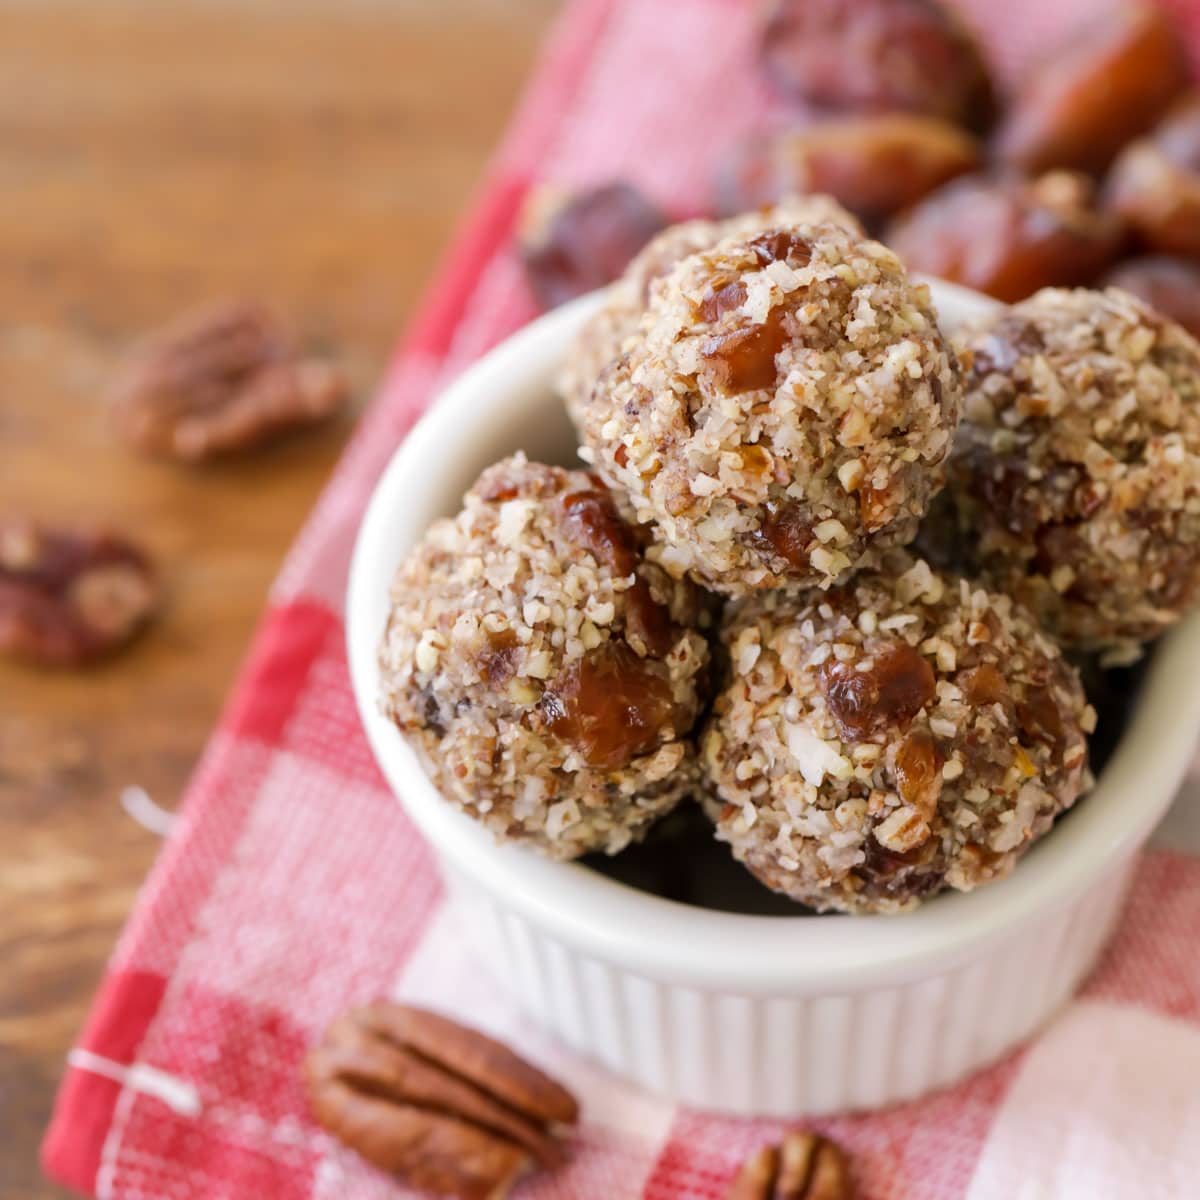 Date balls in a small serving dish